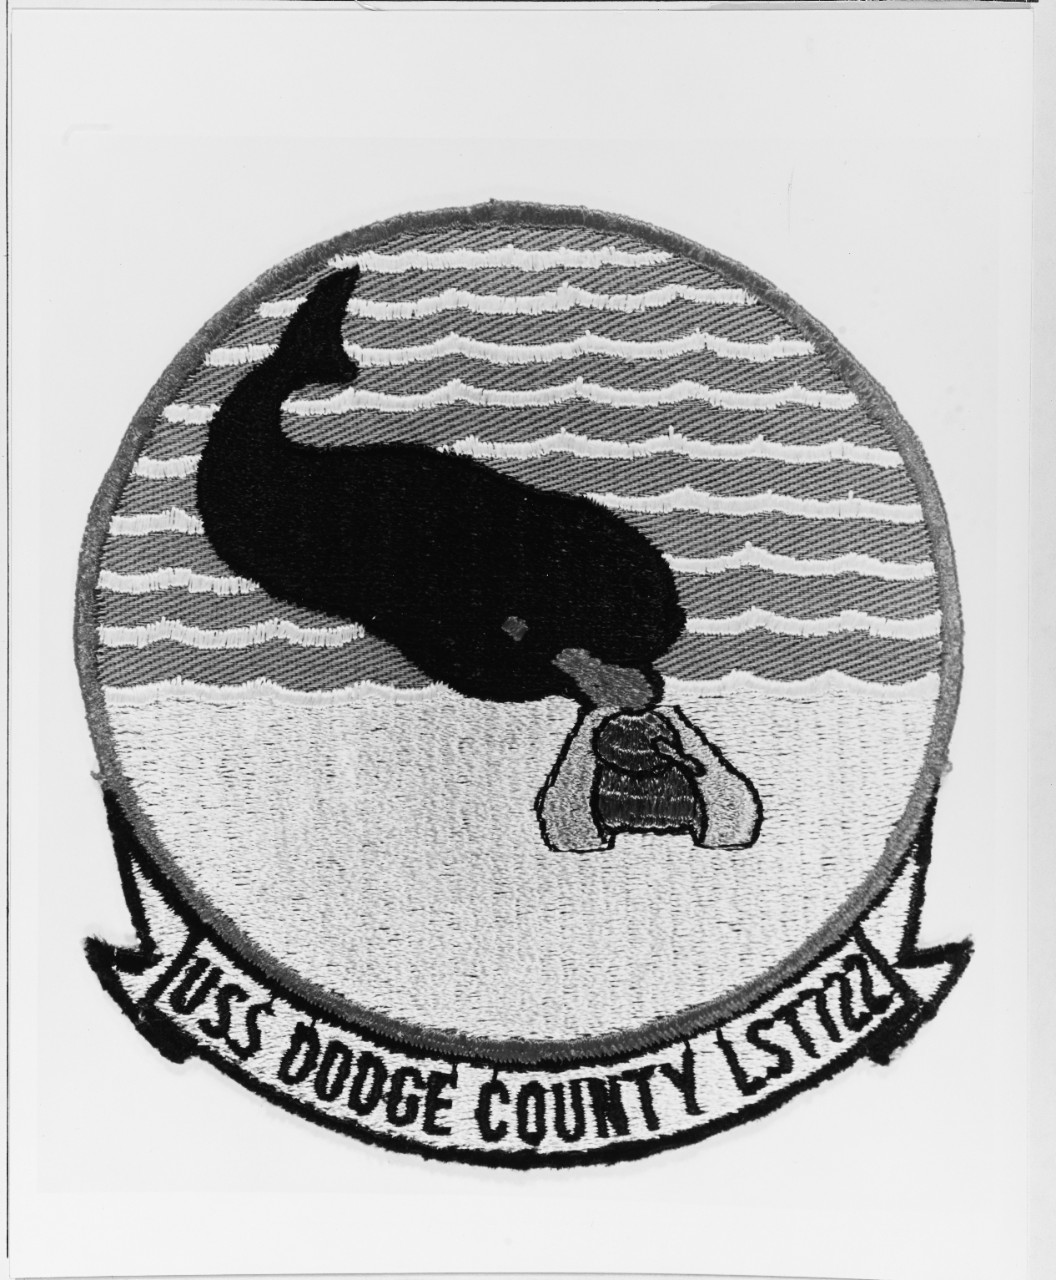 Insignia patch: USS DODGE COUNTY (LST-722)